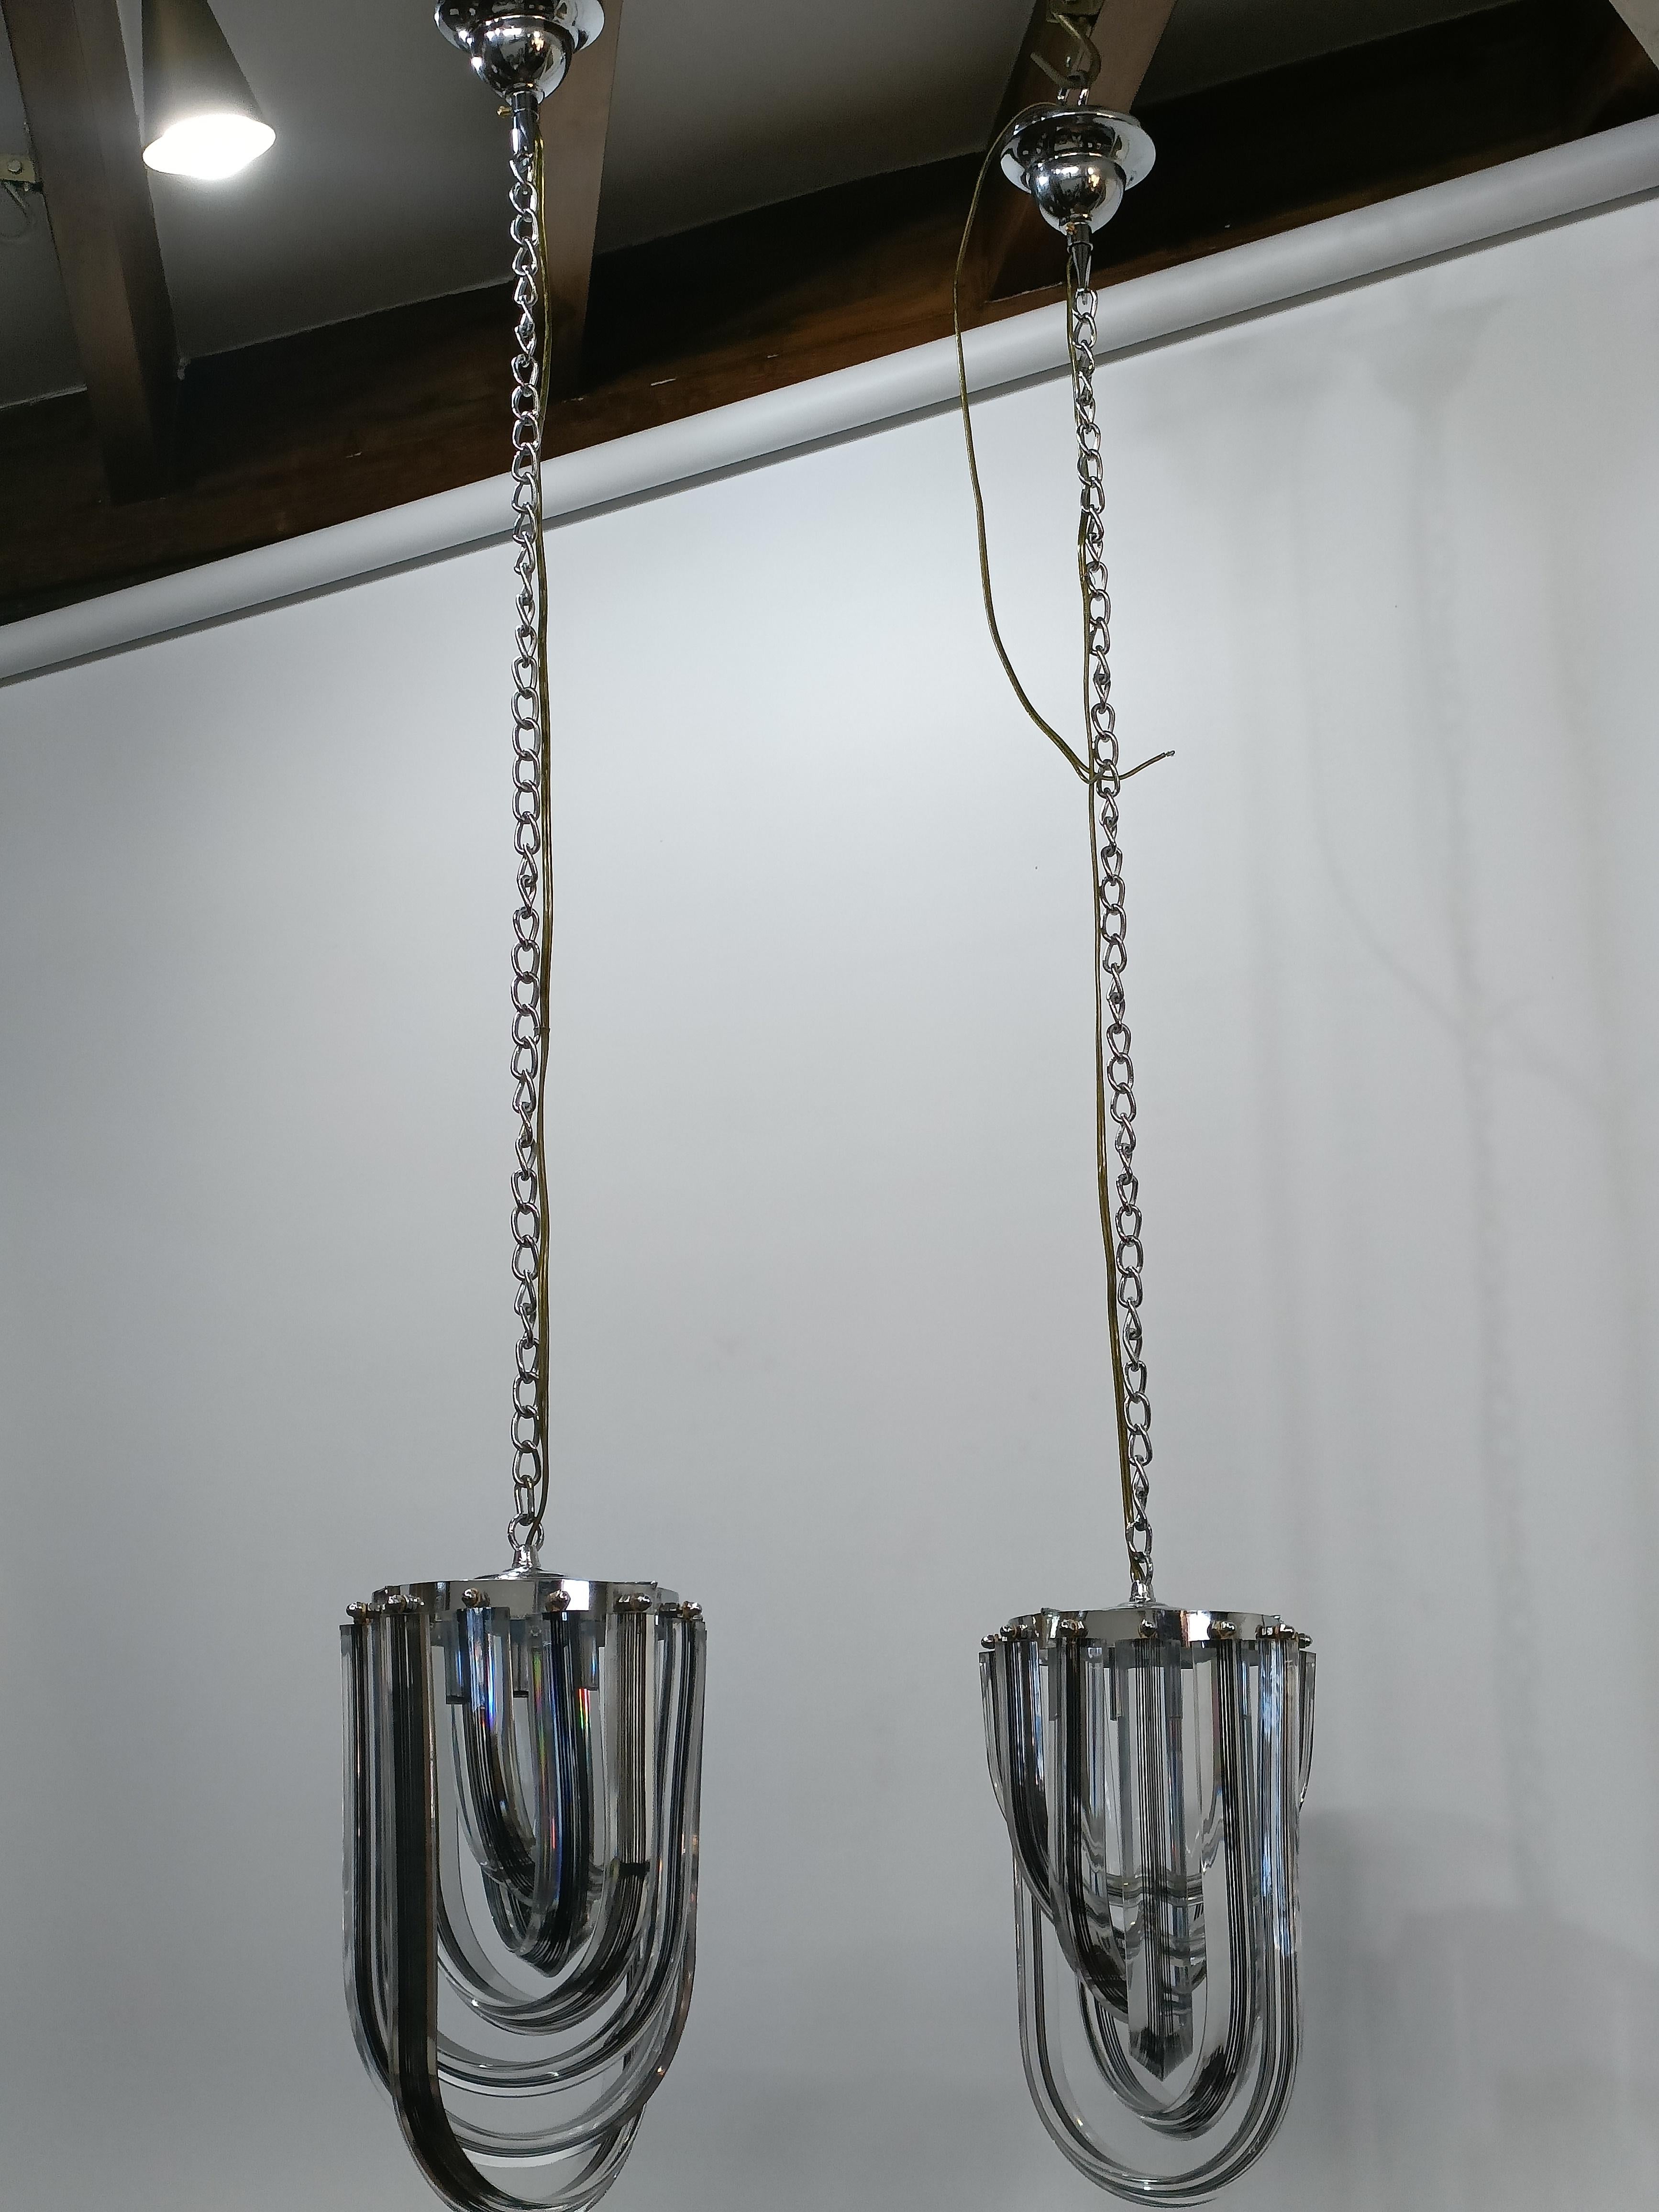 Pair of Acrylic and Chrome Ceiling Pendants, 1970's For Sale 2